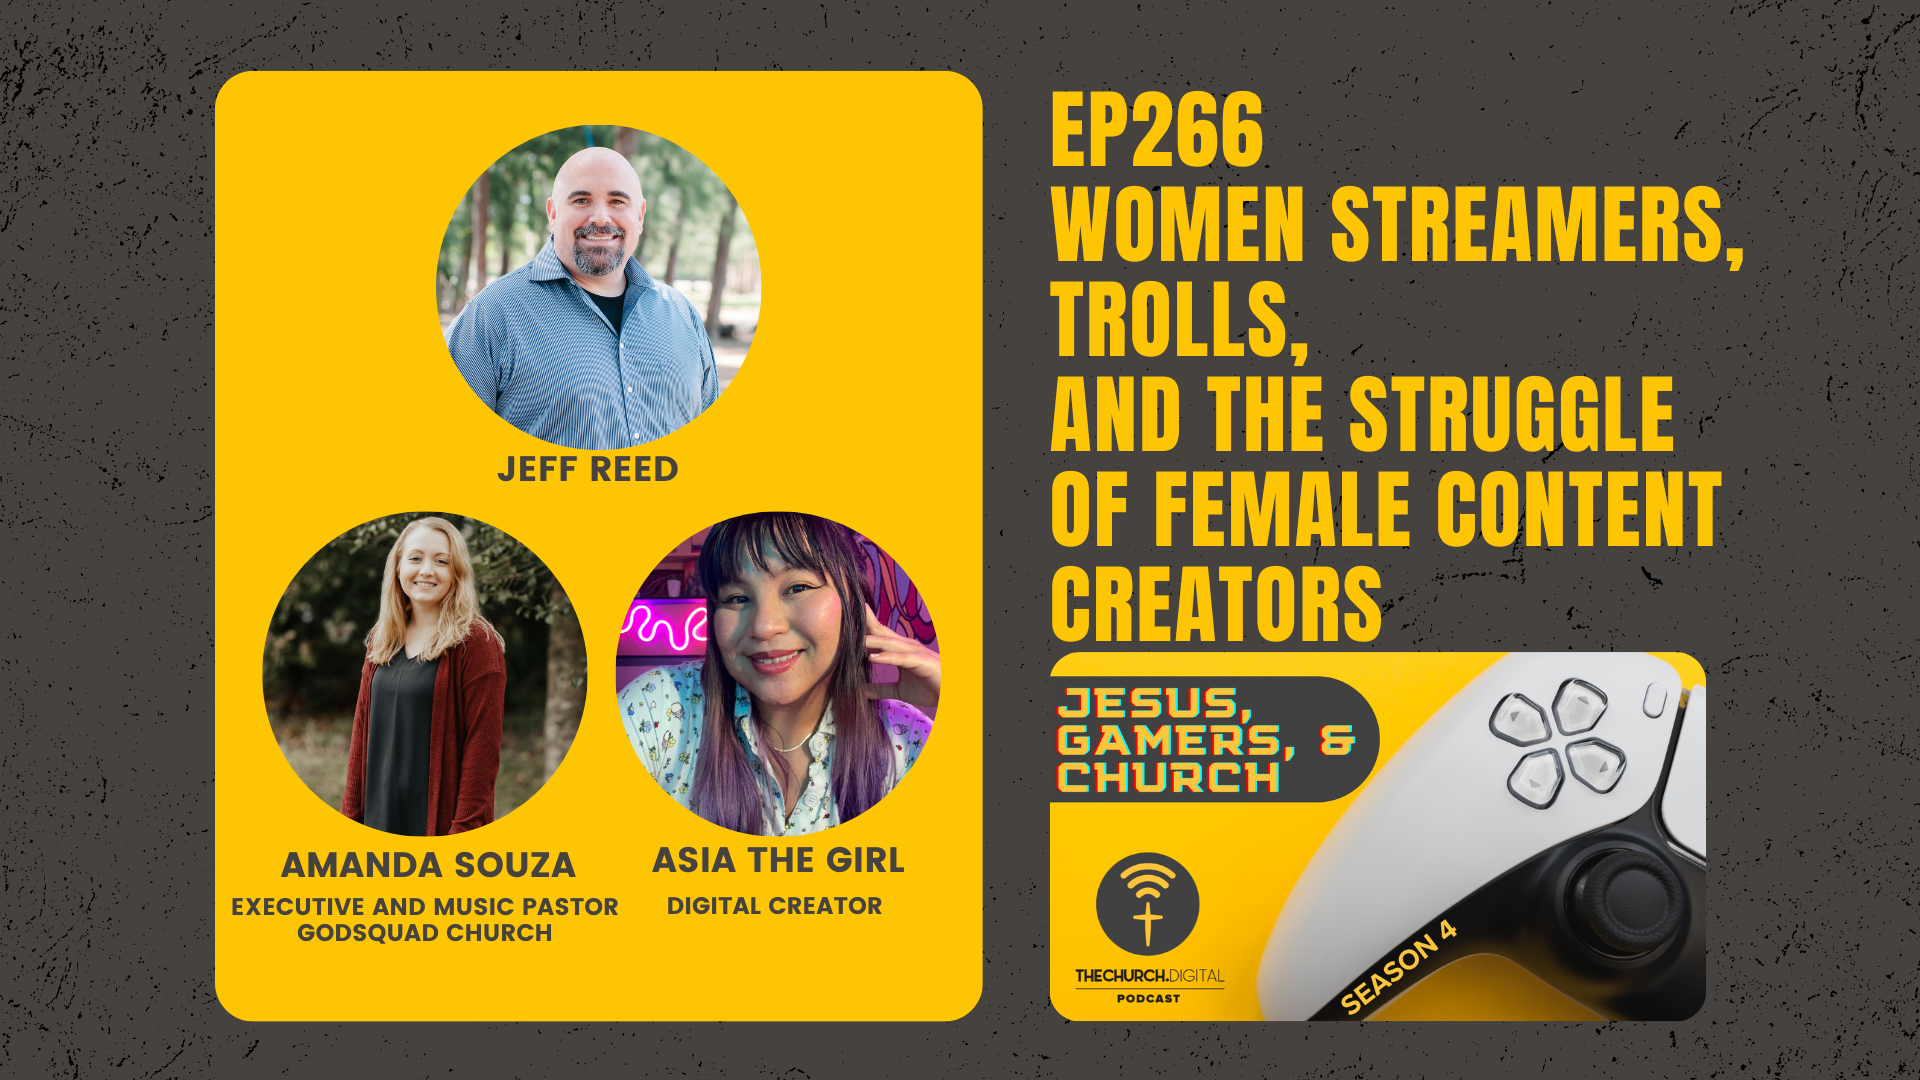 EP266 - Women Streamers, Trolls, and the Struggle of Female Content Creators